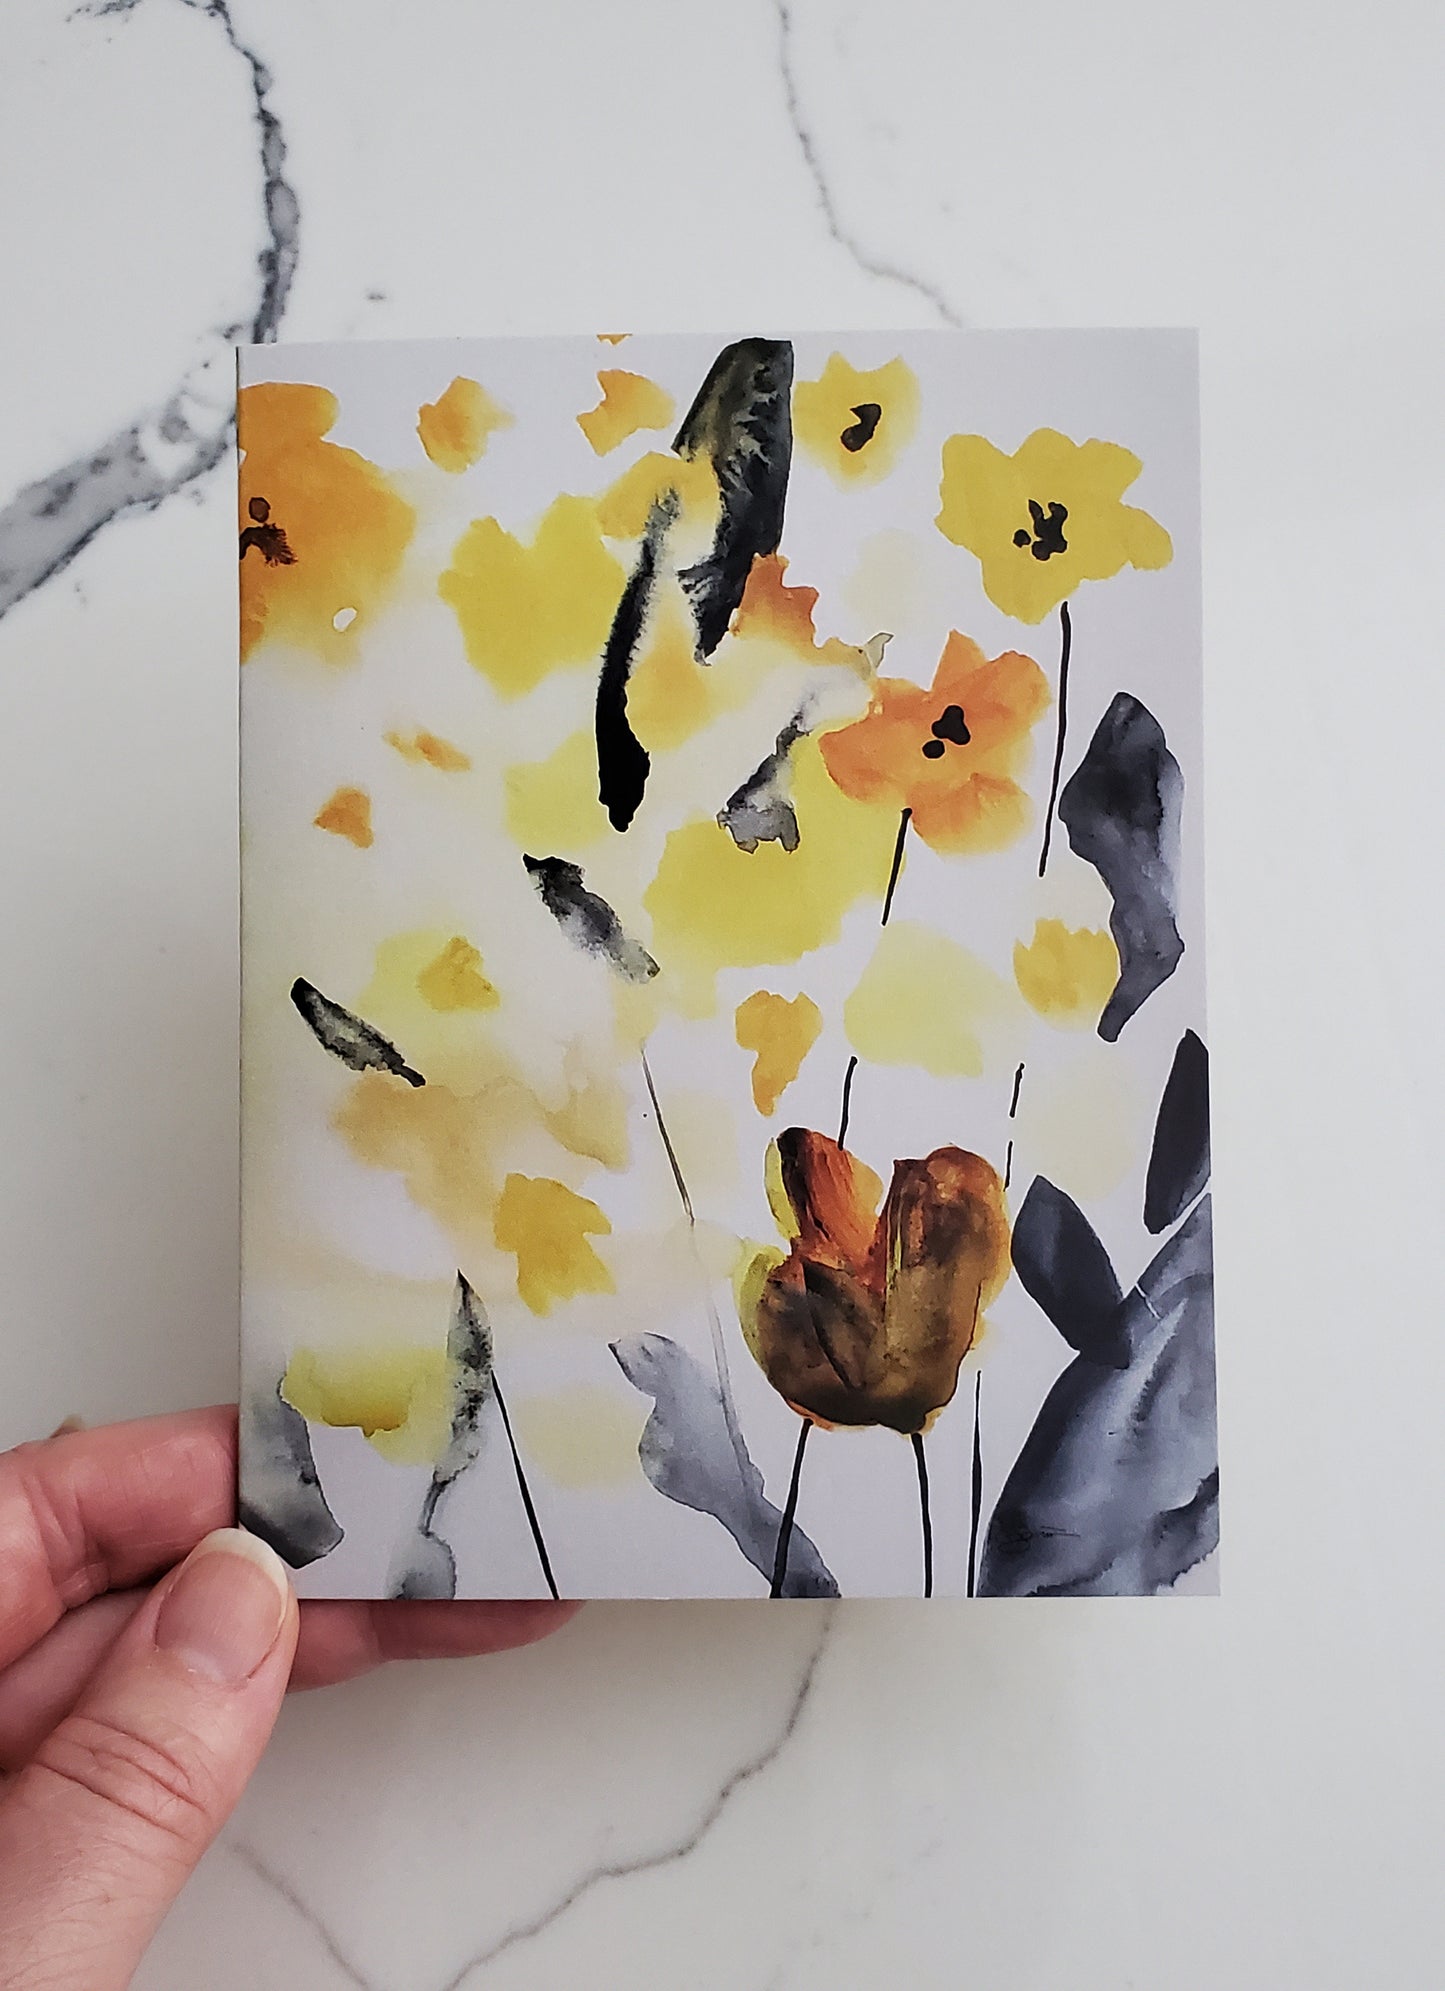 Yellow Floral Card